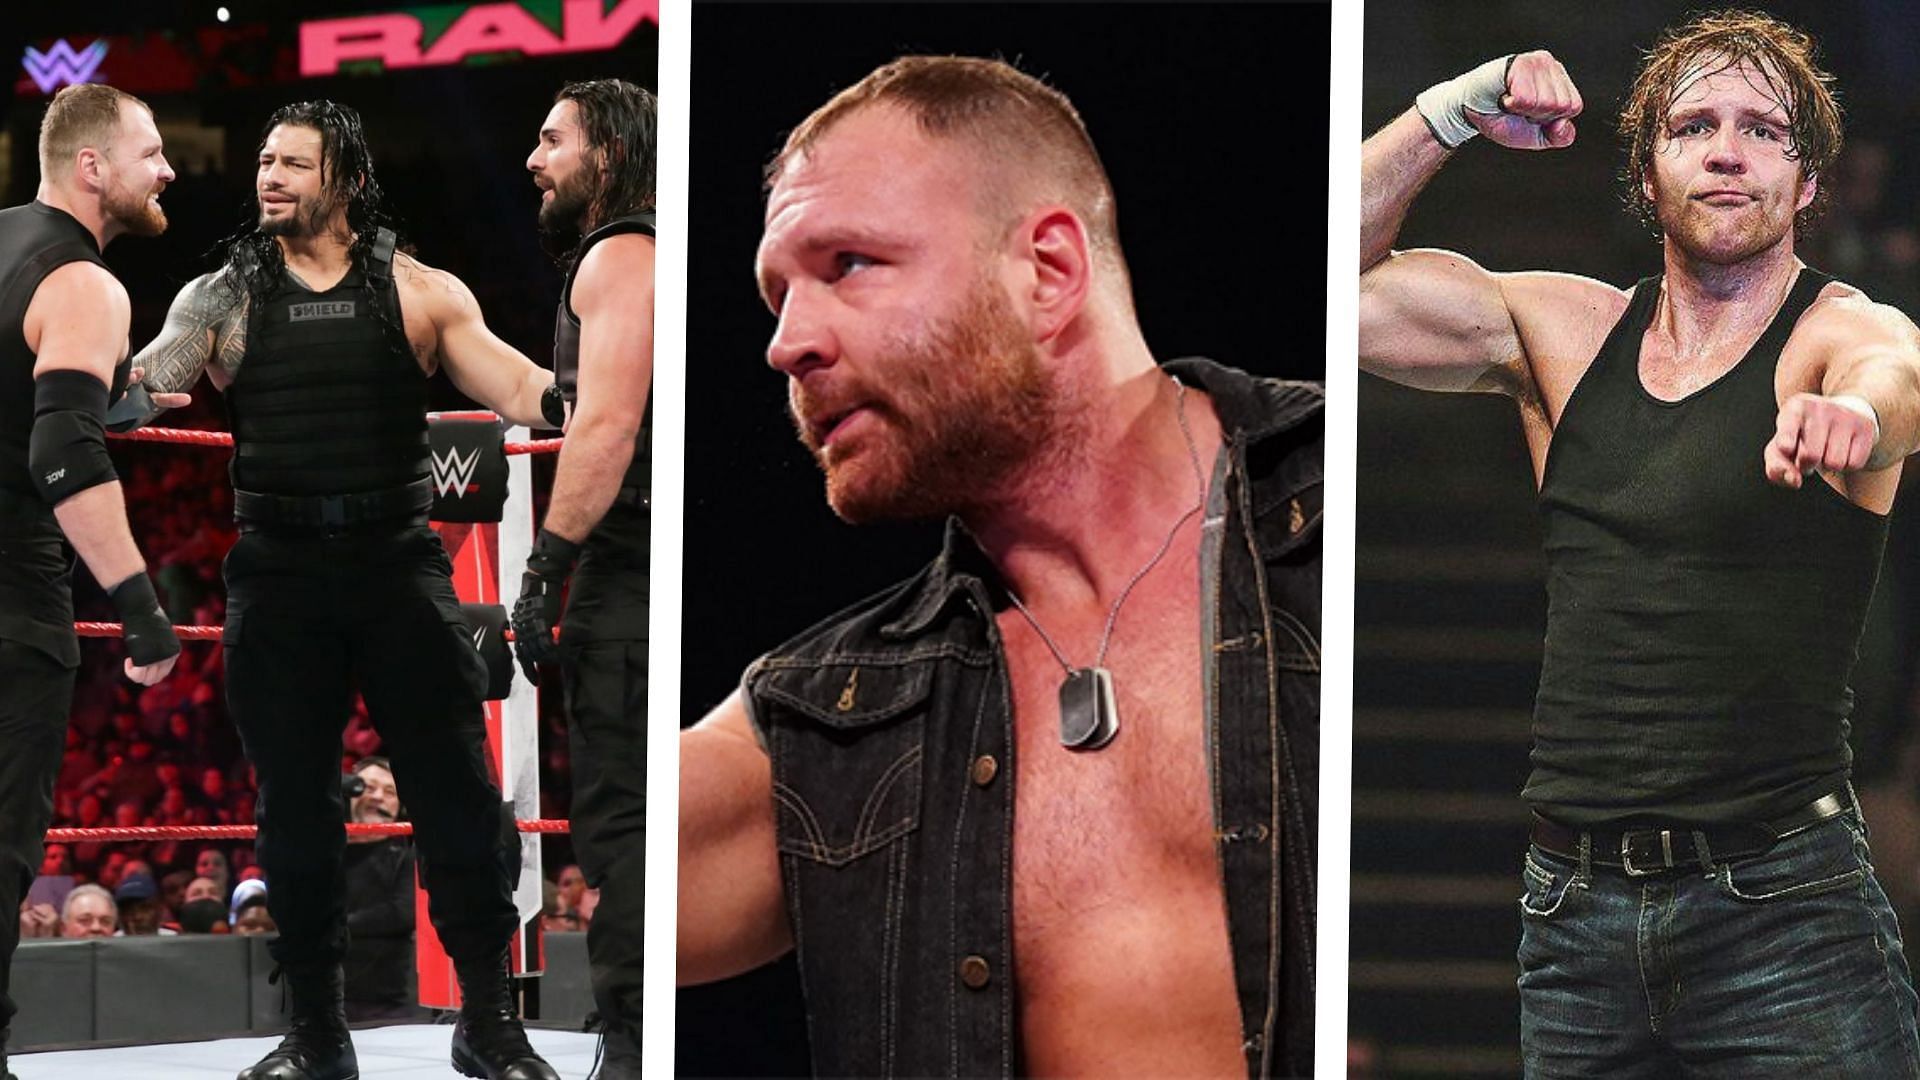 Where is Dean Ambrose now? Read on to find out